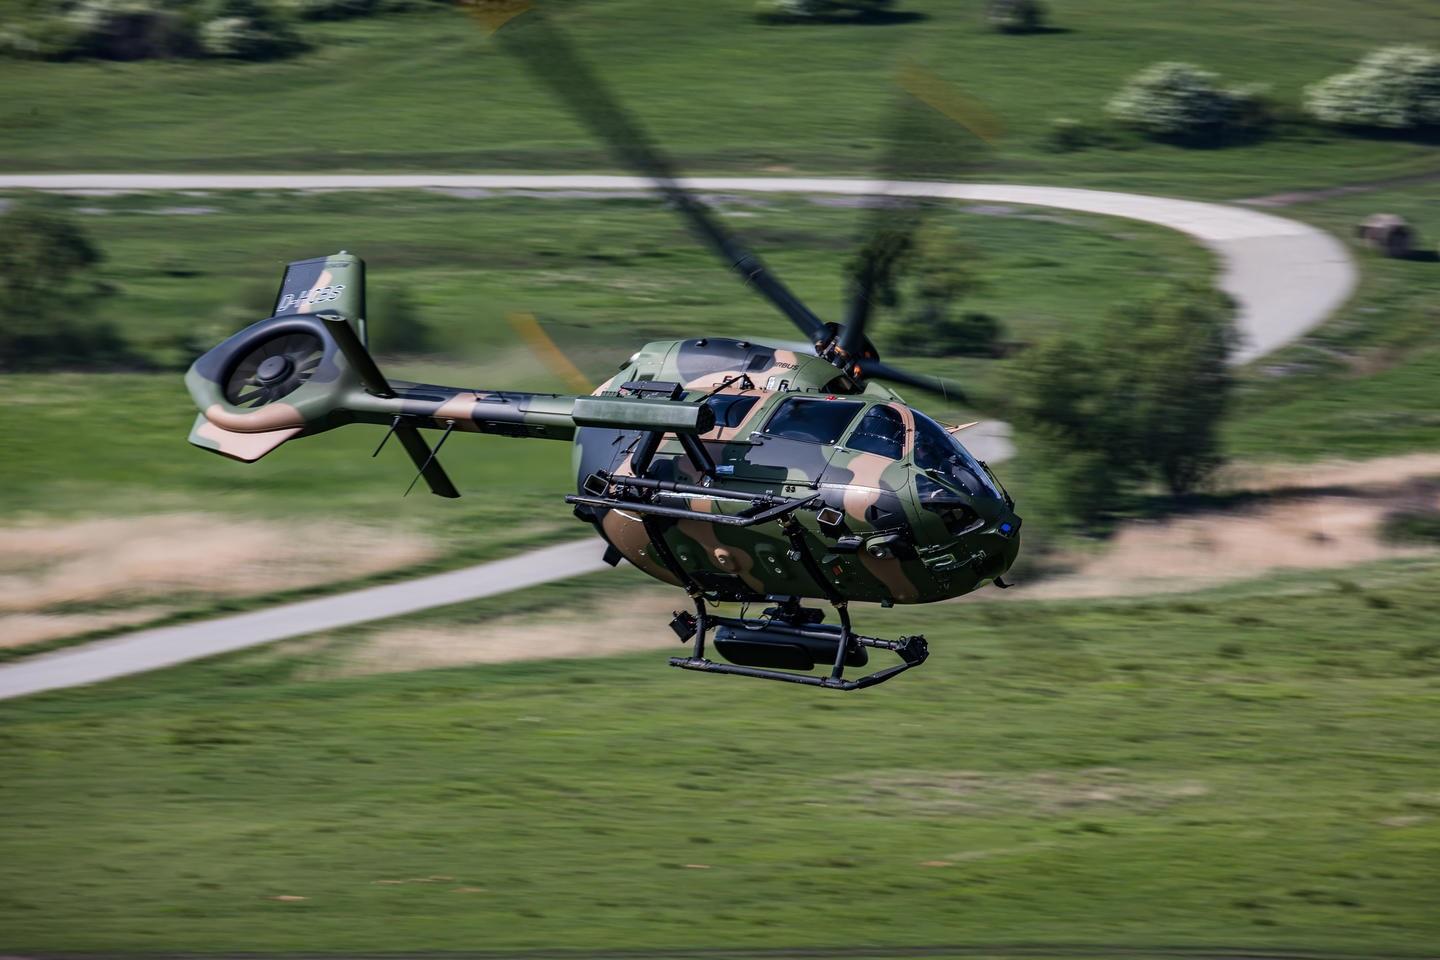 Cyprus Orders Six Airbus H145M Light Attack Helicopters for Its National Guard